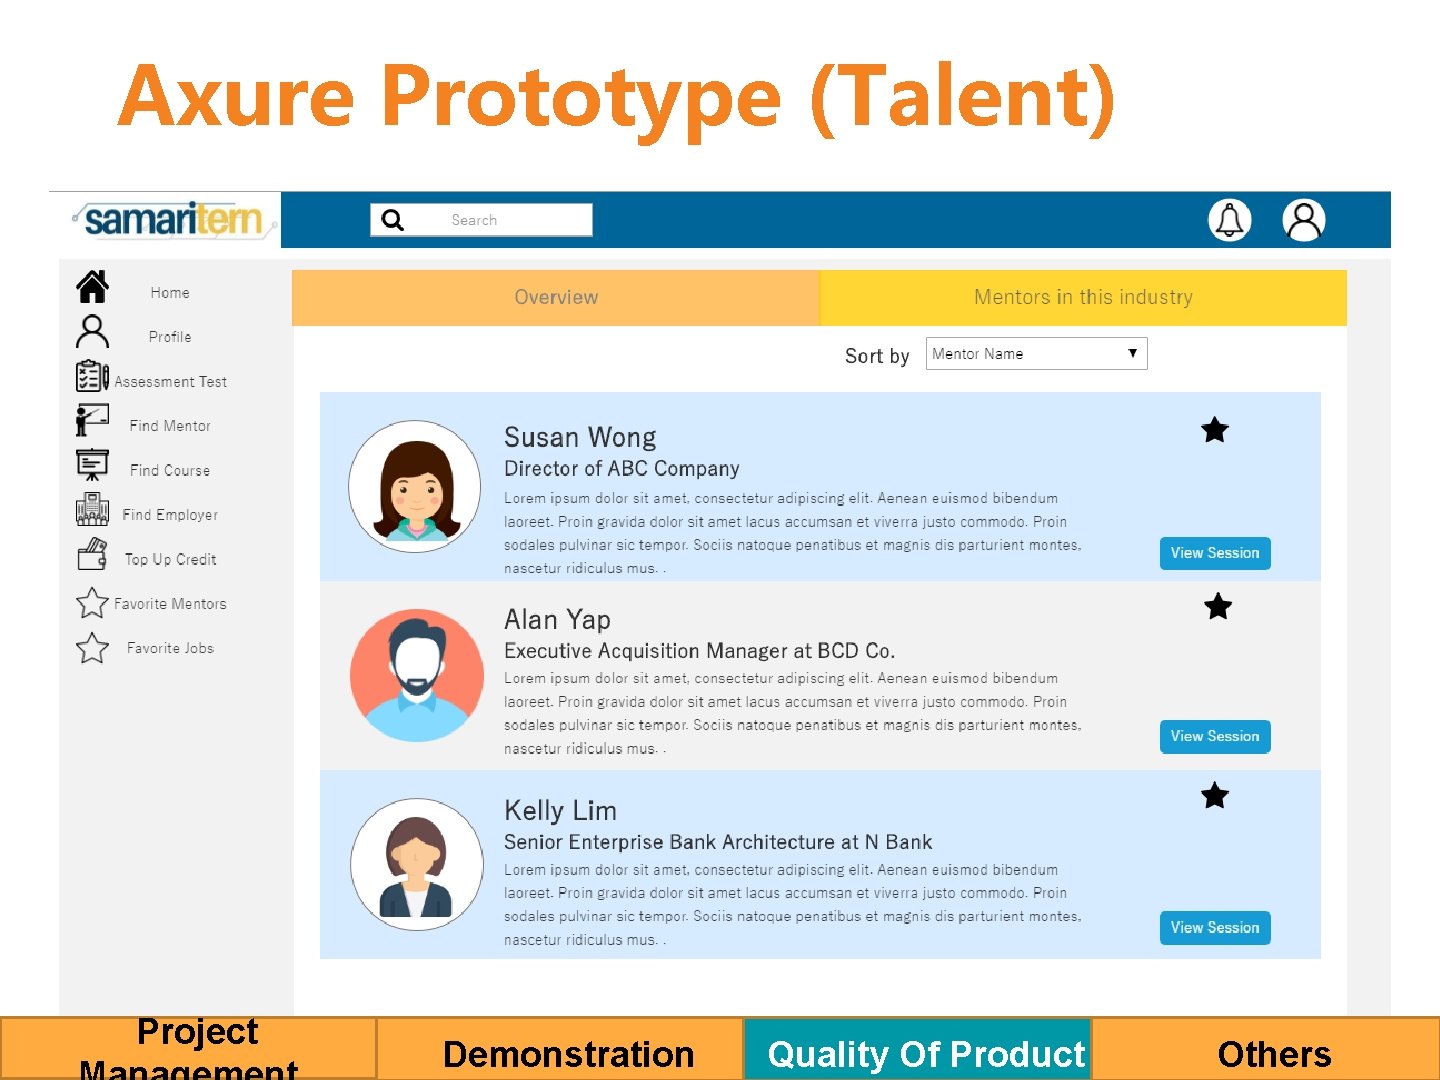 Axure Prototype (Talent) Project Demonstration Quality Of Product Others 